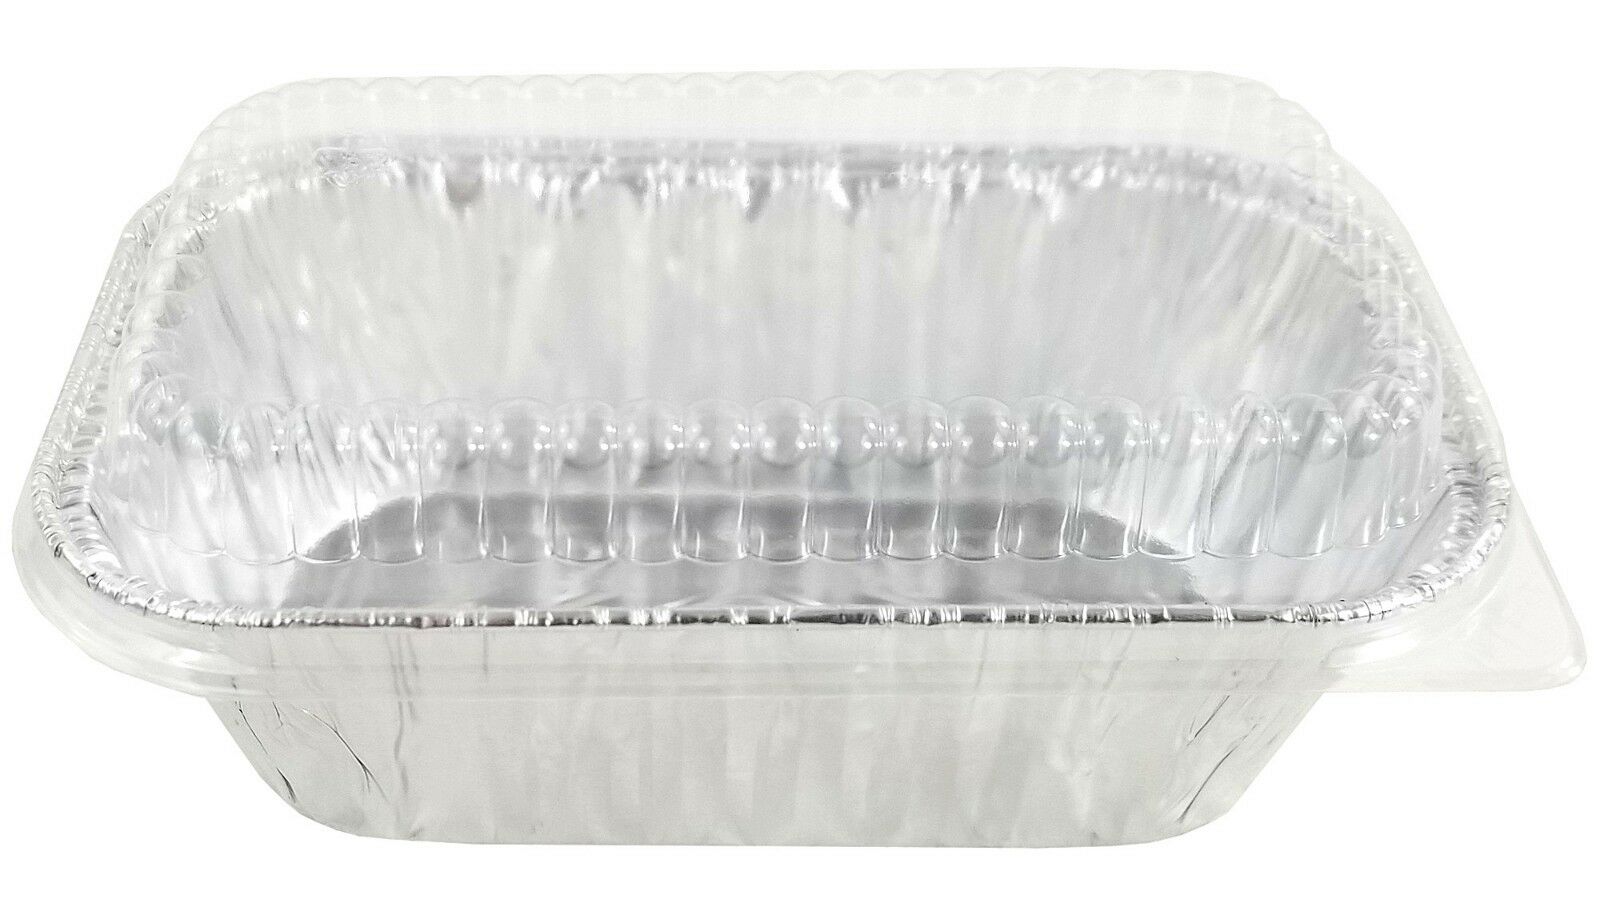 50 Pack Small Aluminum Pans with Lids, 1lb Capacity Disposable